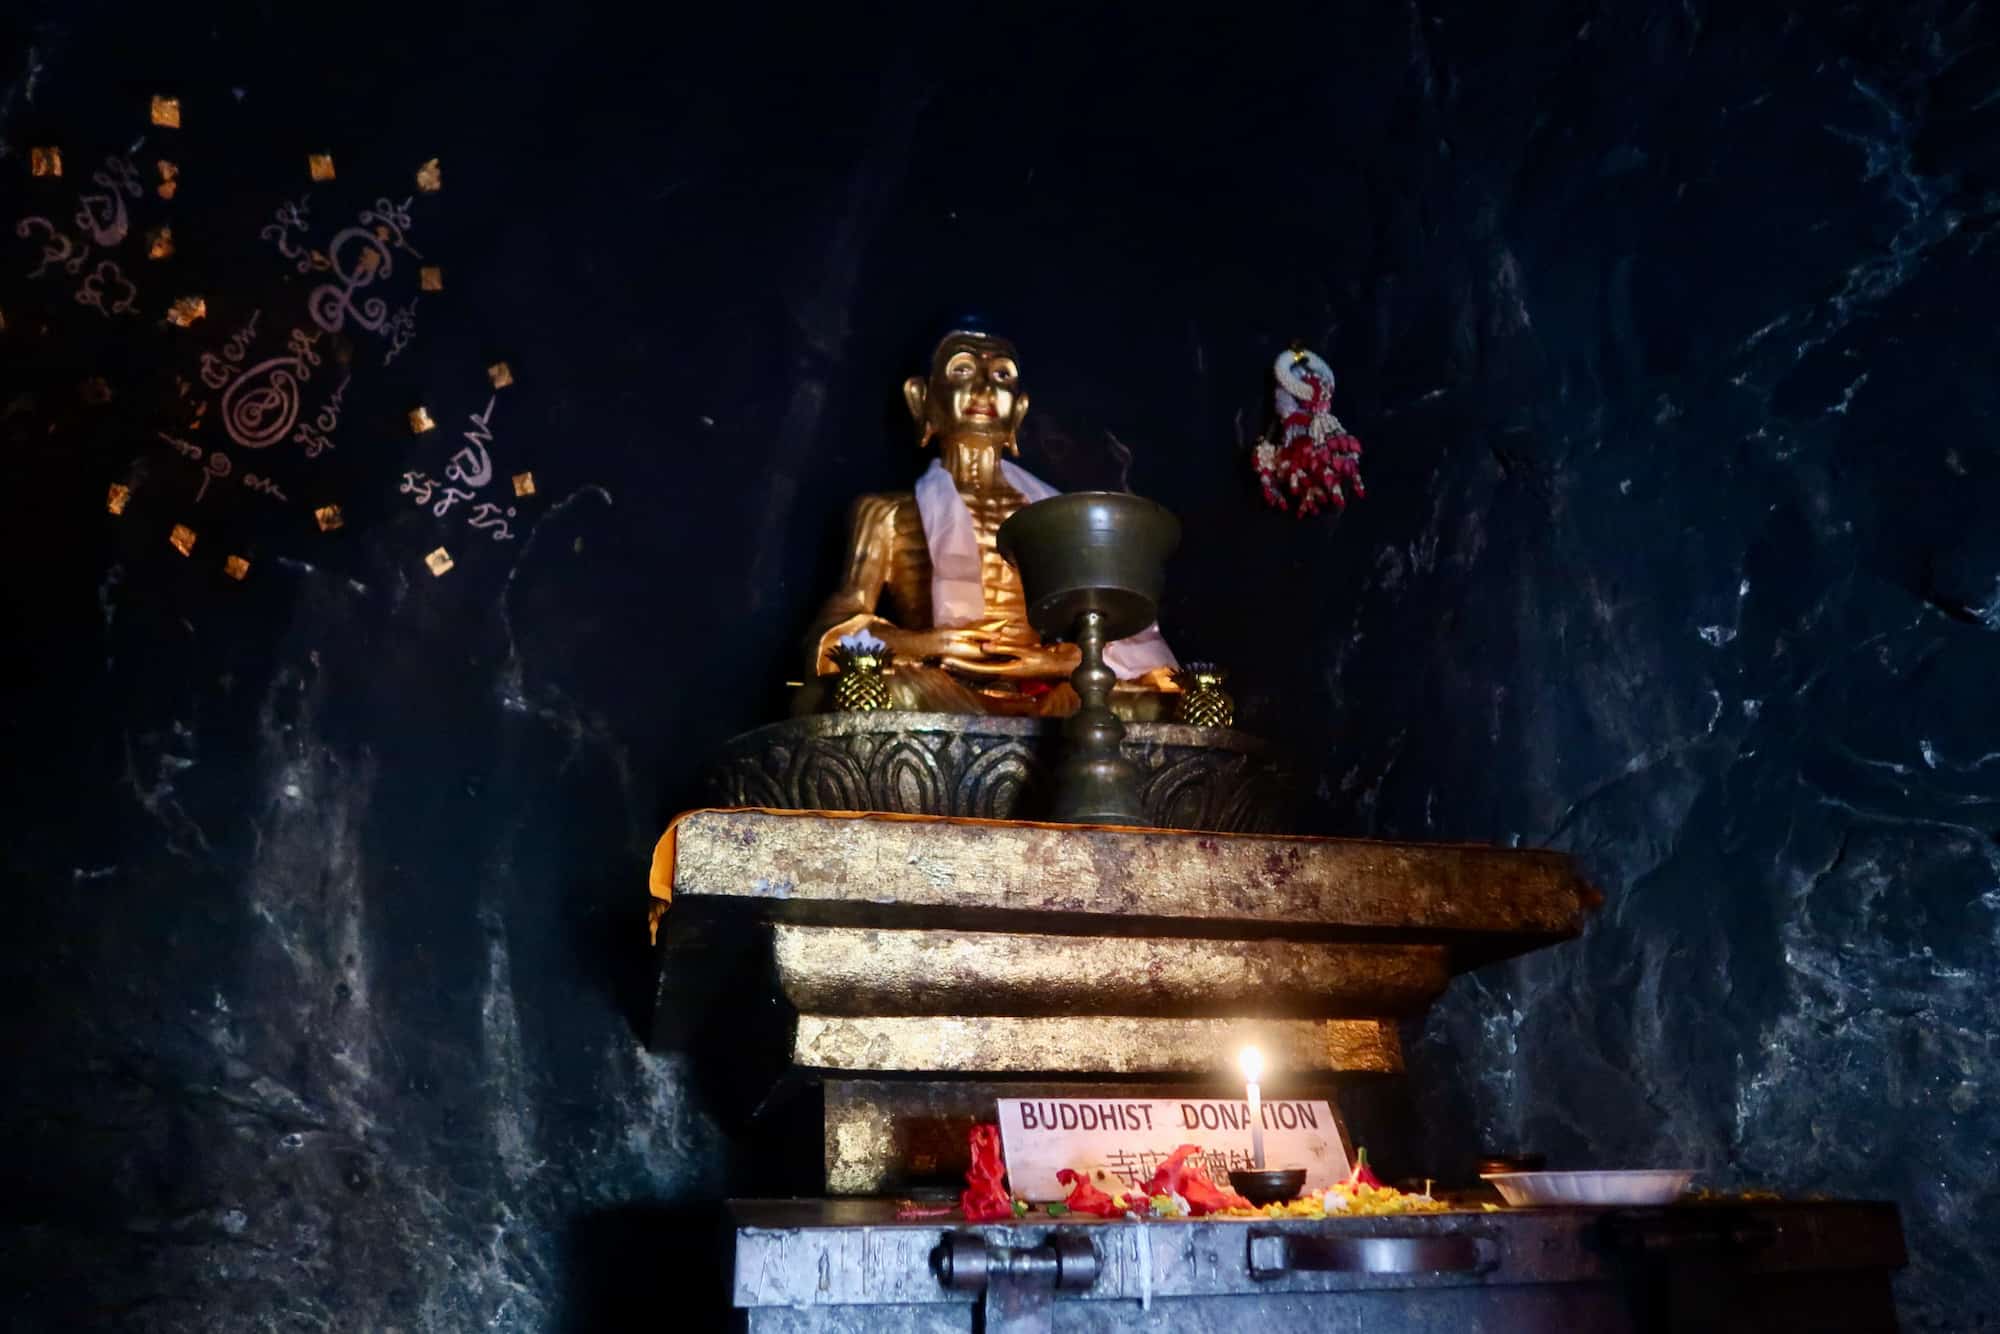 Dungeshwari Cave Temple: Where Buddha Starved Himself to Death